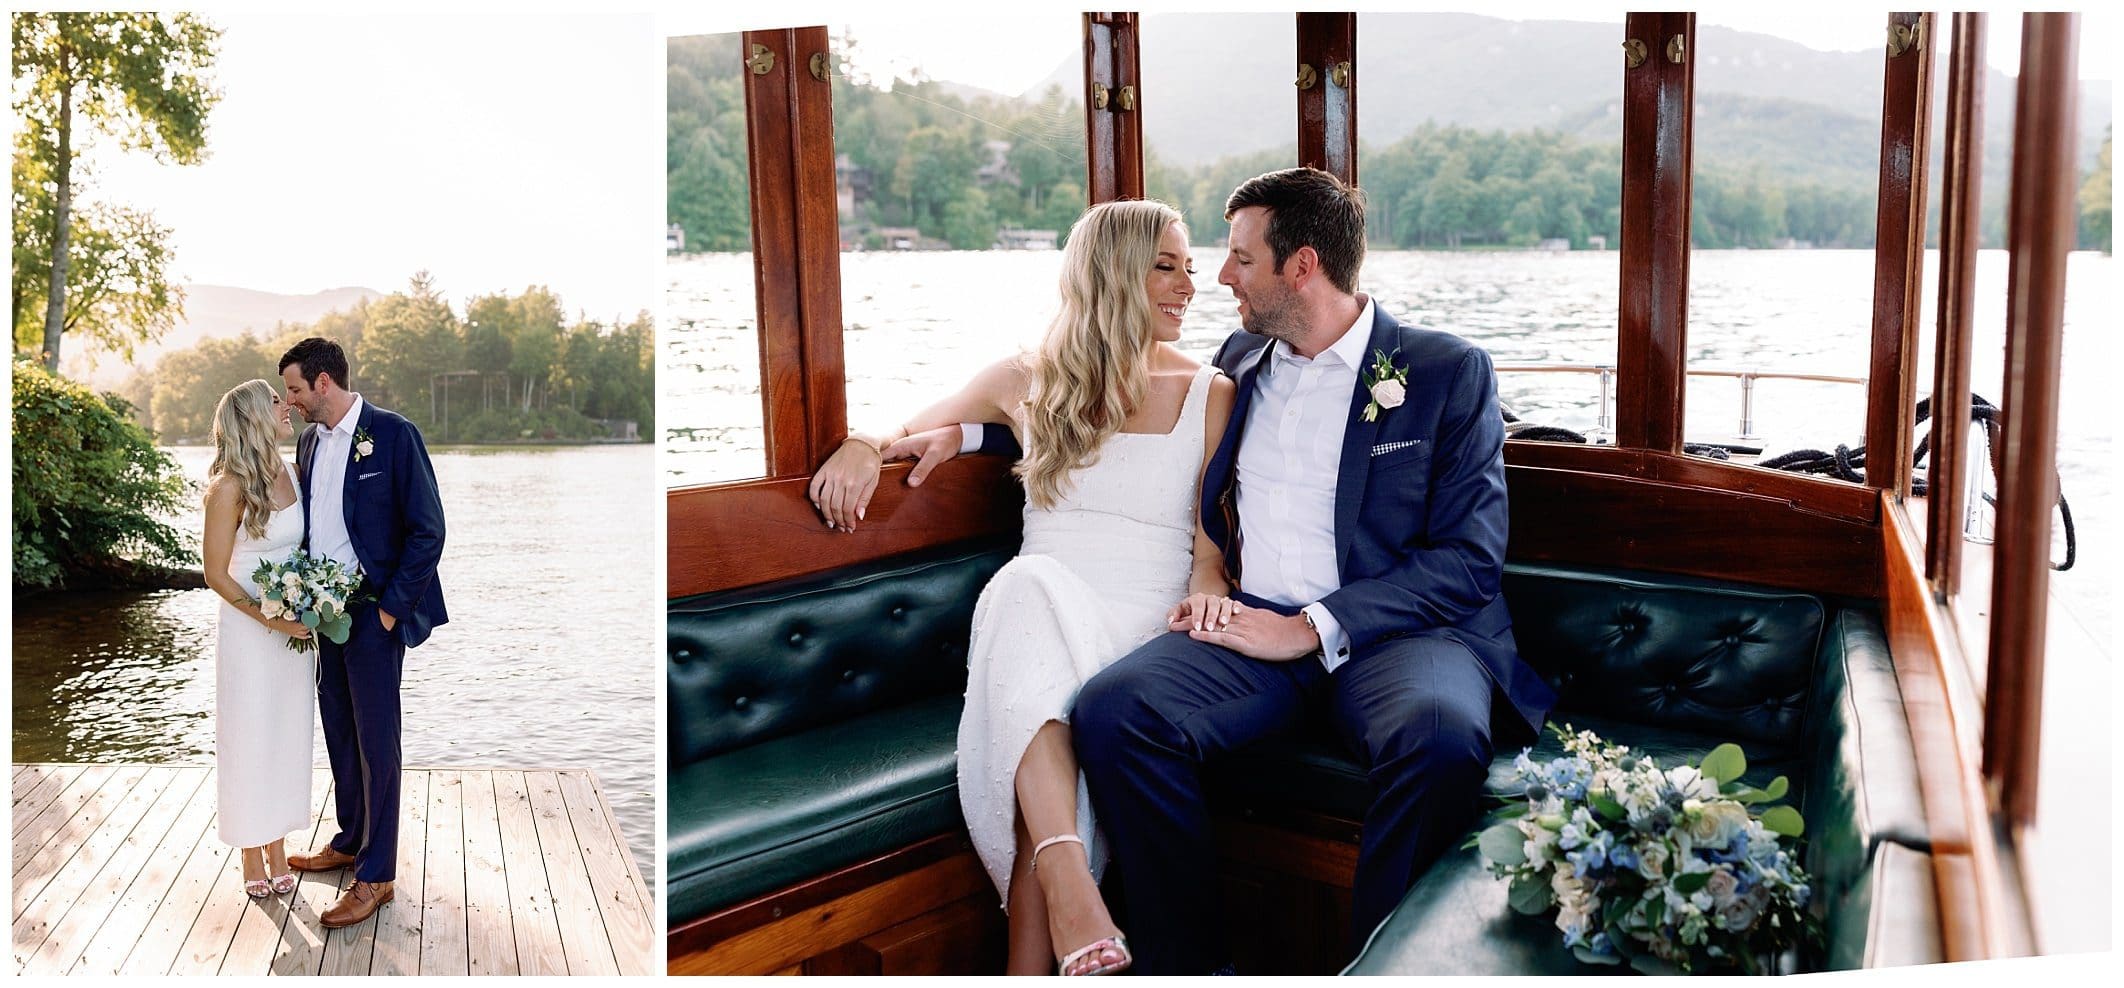 boat ride for an intimate mountain wedding